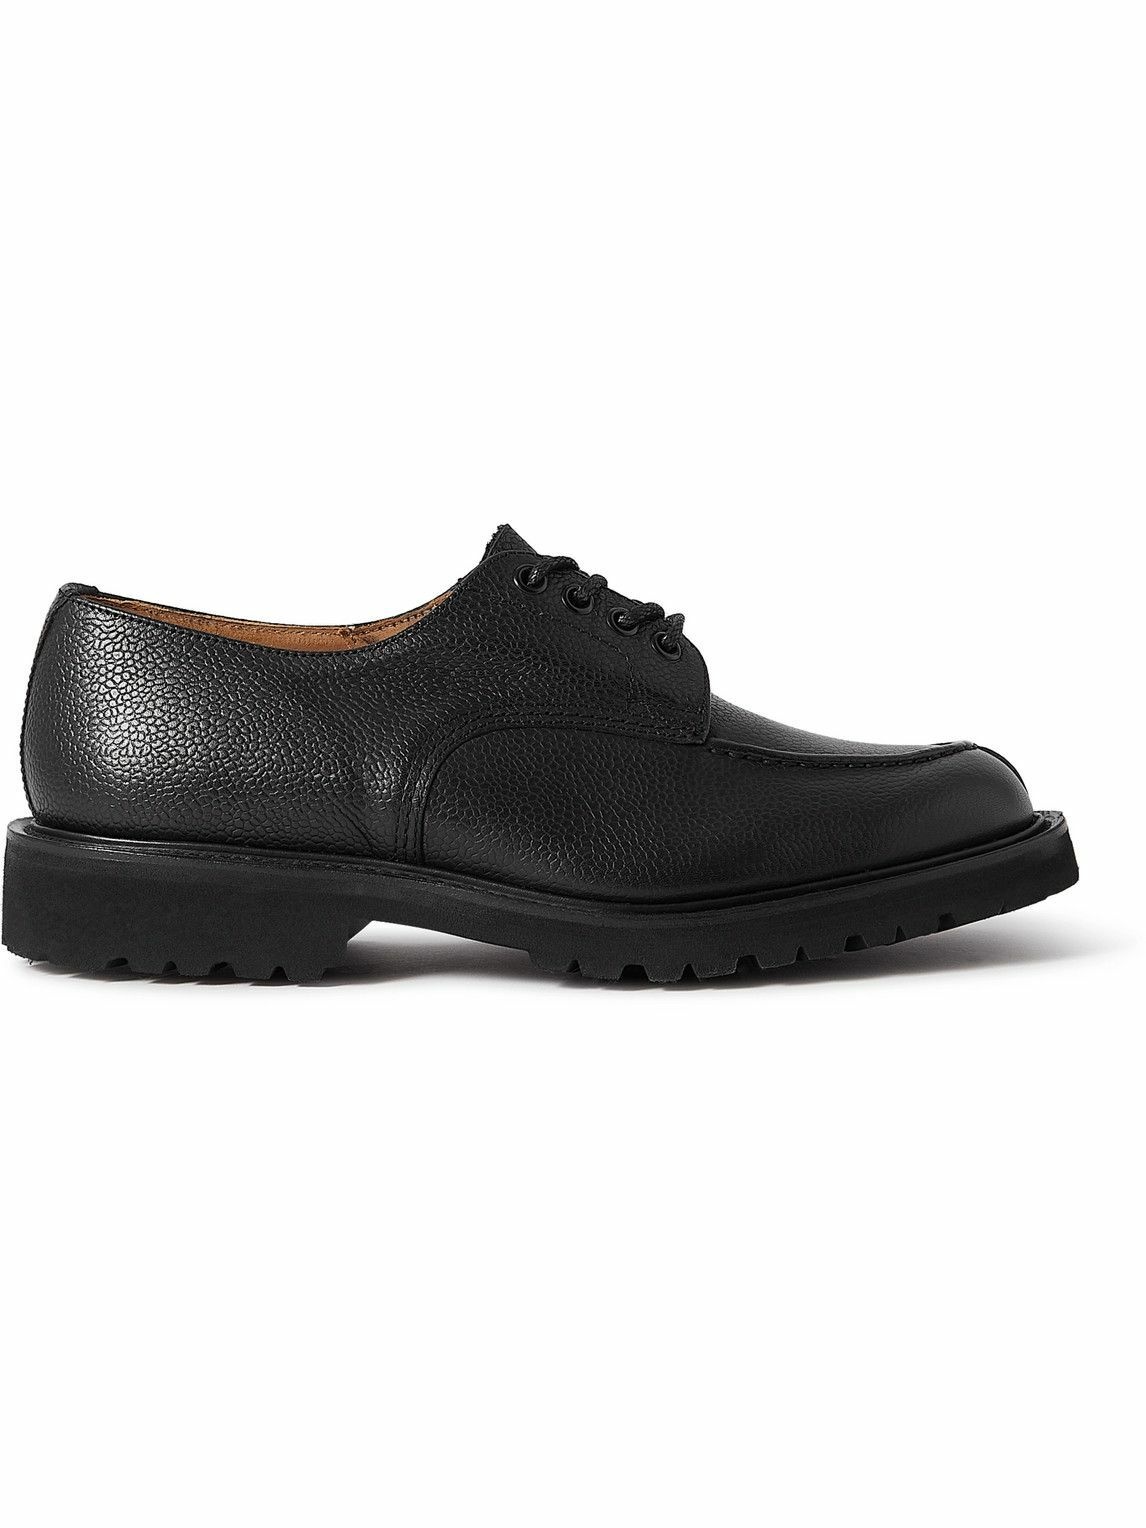 Photo: Tricker's - Kilsby Full-Grain Leather Derby Shoes - Black